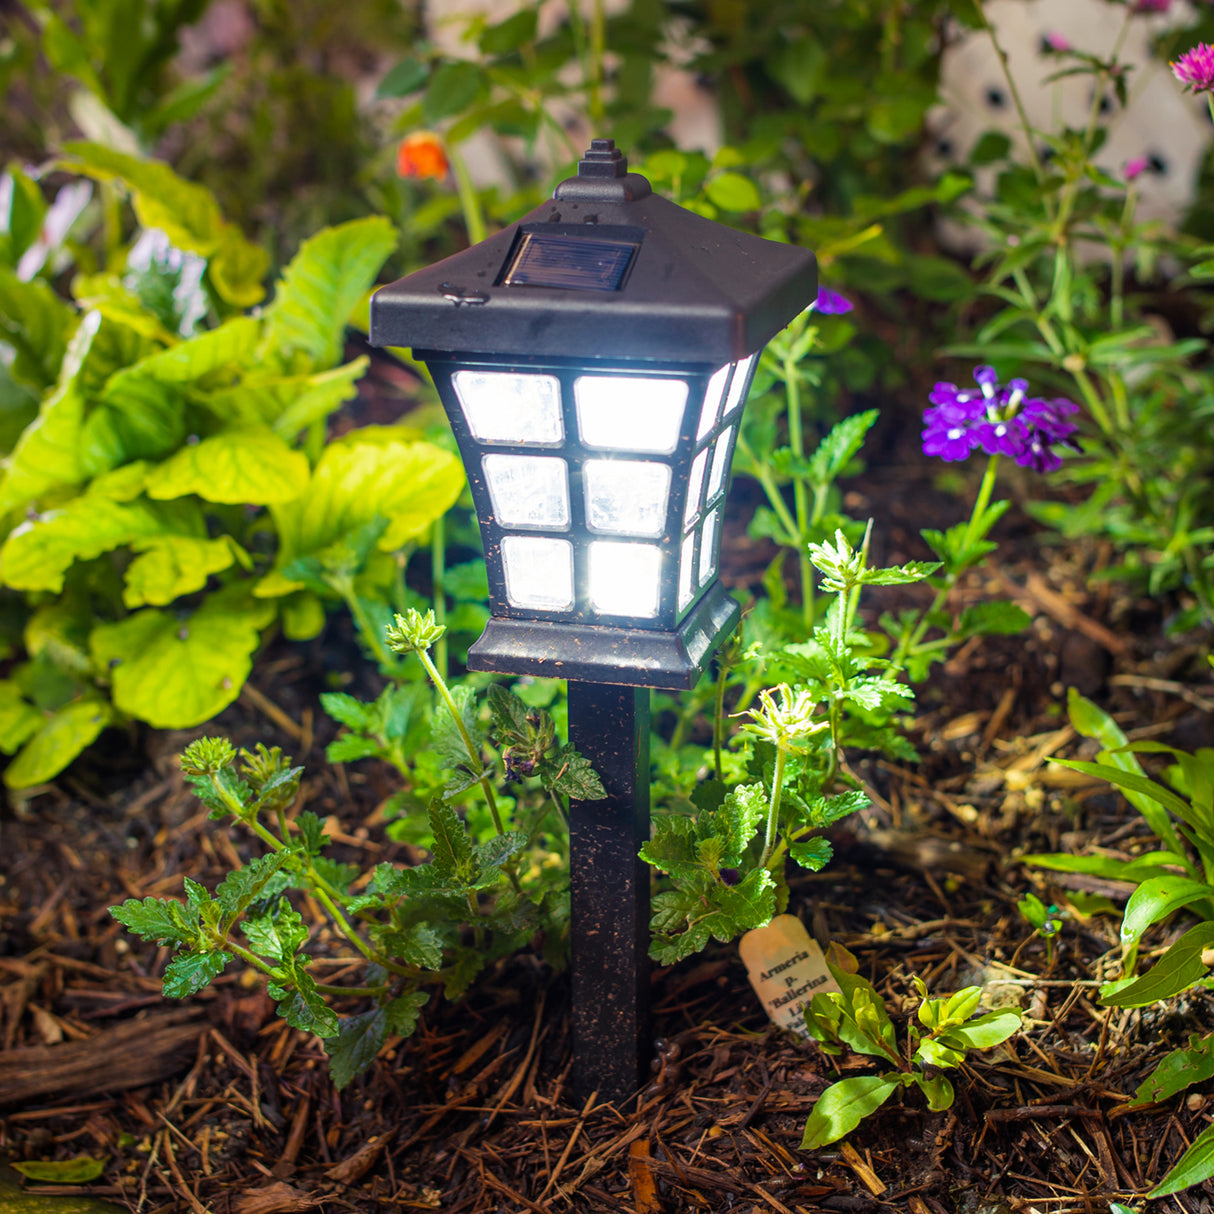 6 Pack Pagoda Solar Walkway Decorative Light, Illuminate your Garden | Perfect for Outdoor Pathways, Front Porch, Yards, Driveways (Black, Warm White)